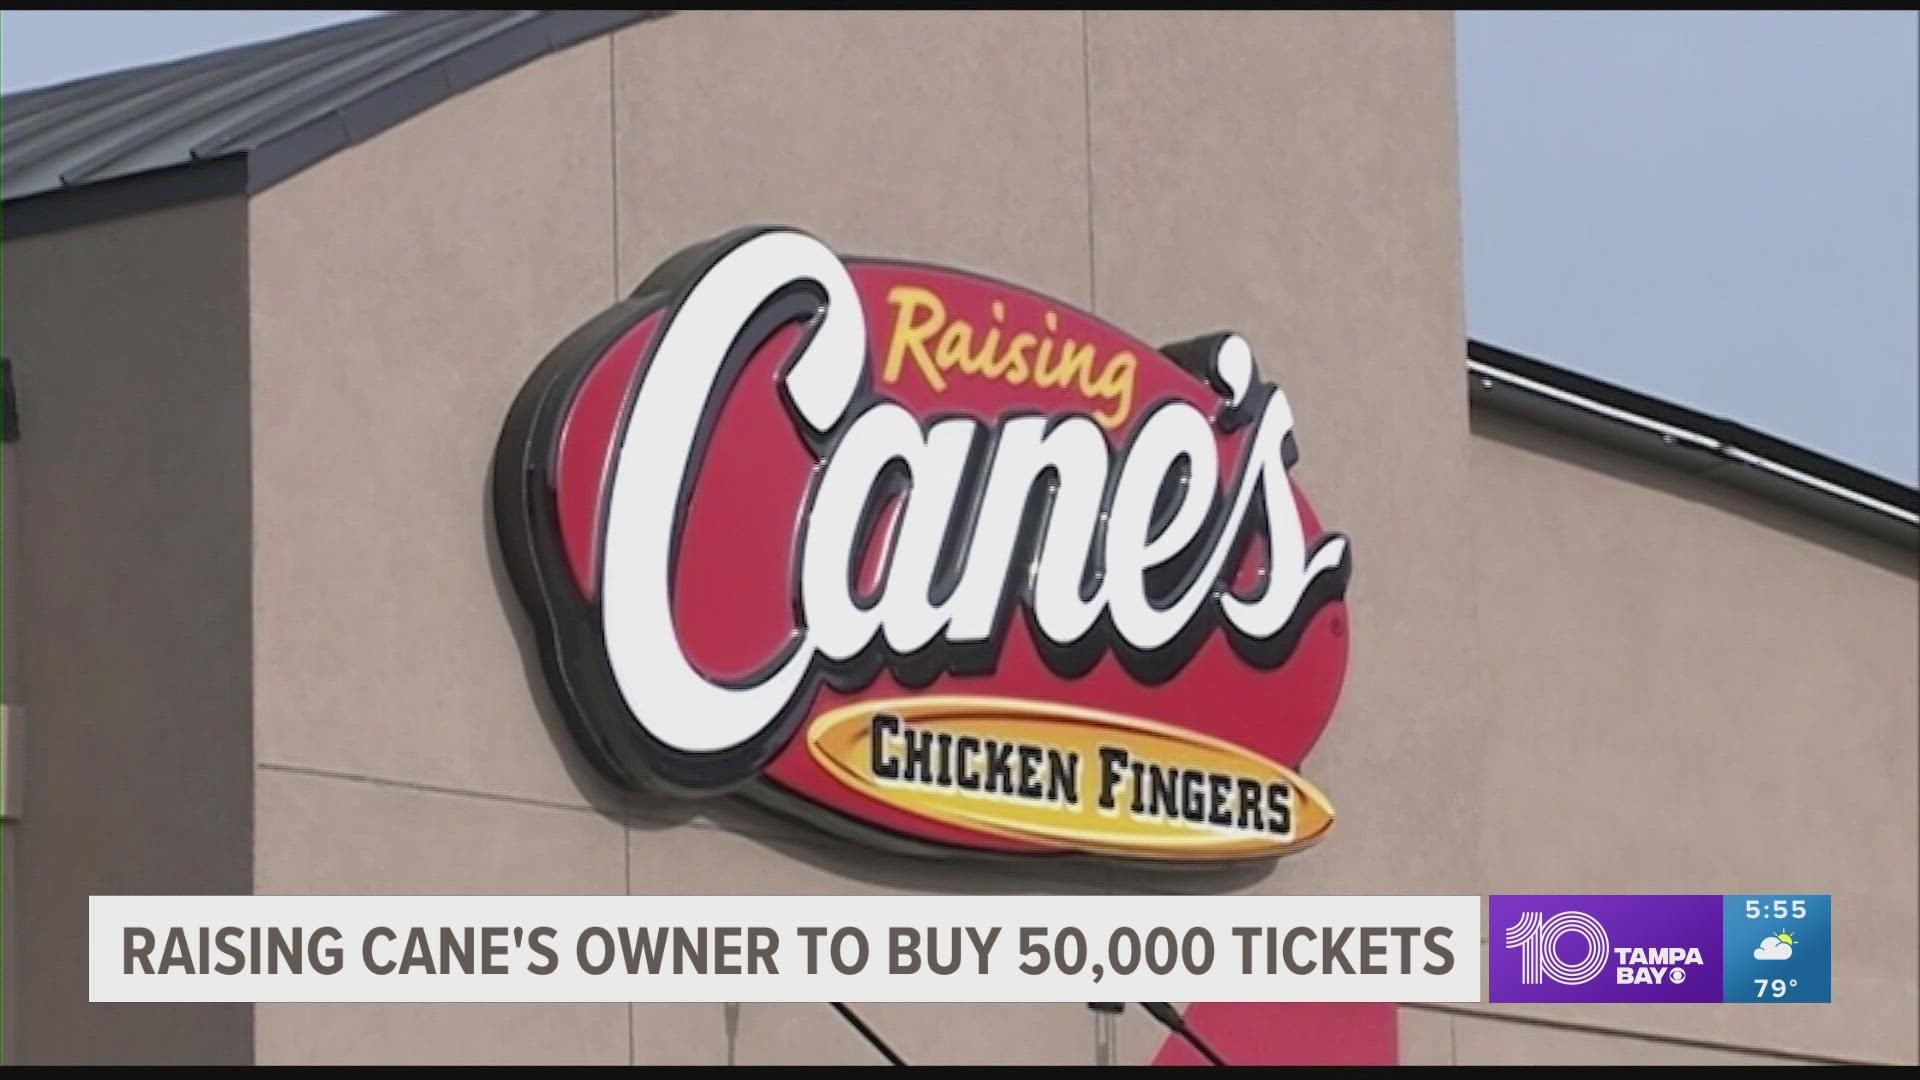 If any of the 50,000 tickets is the lucky number, each of Raising Cane’s employees would win thousands.